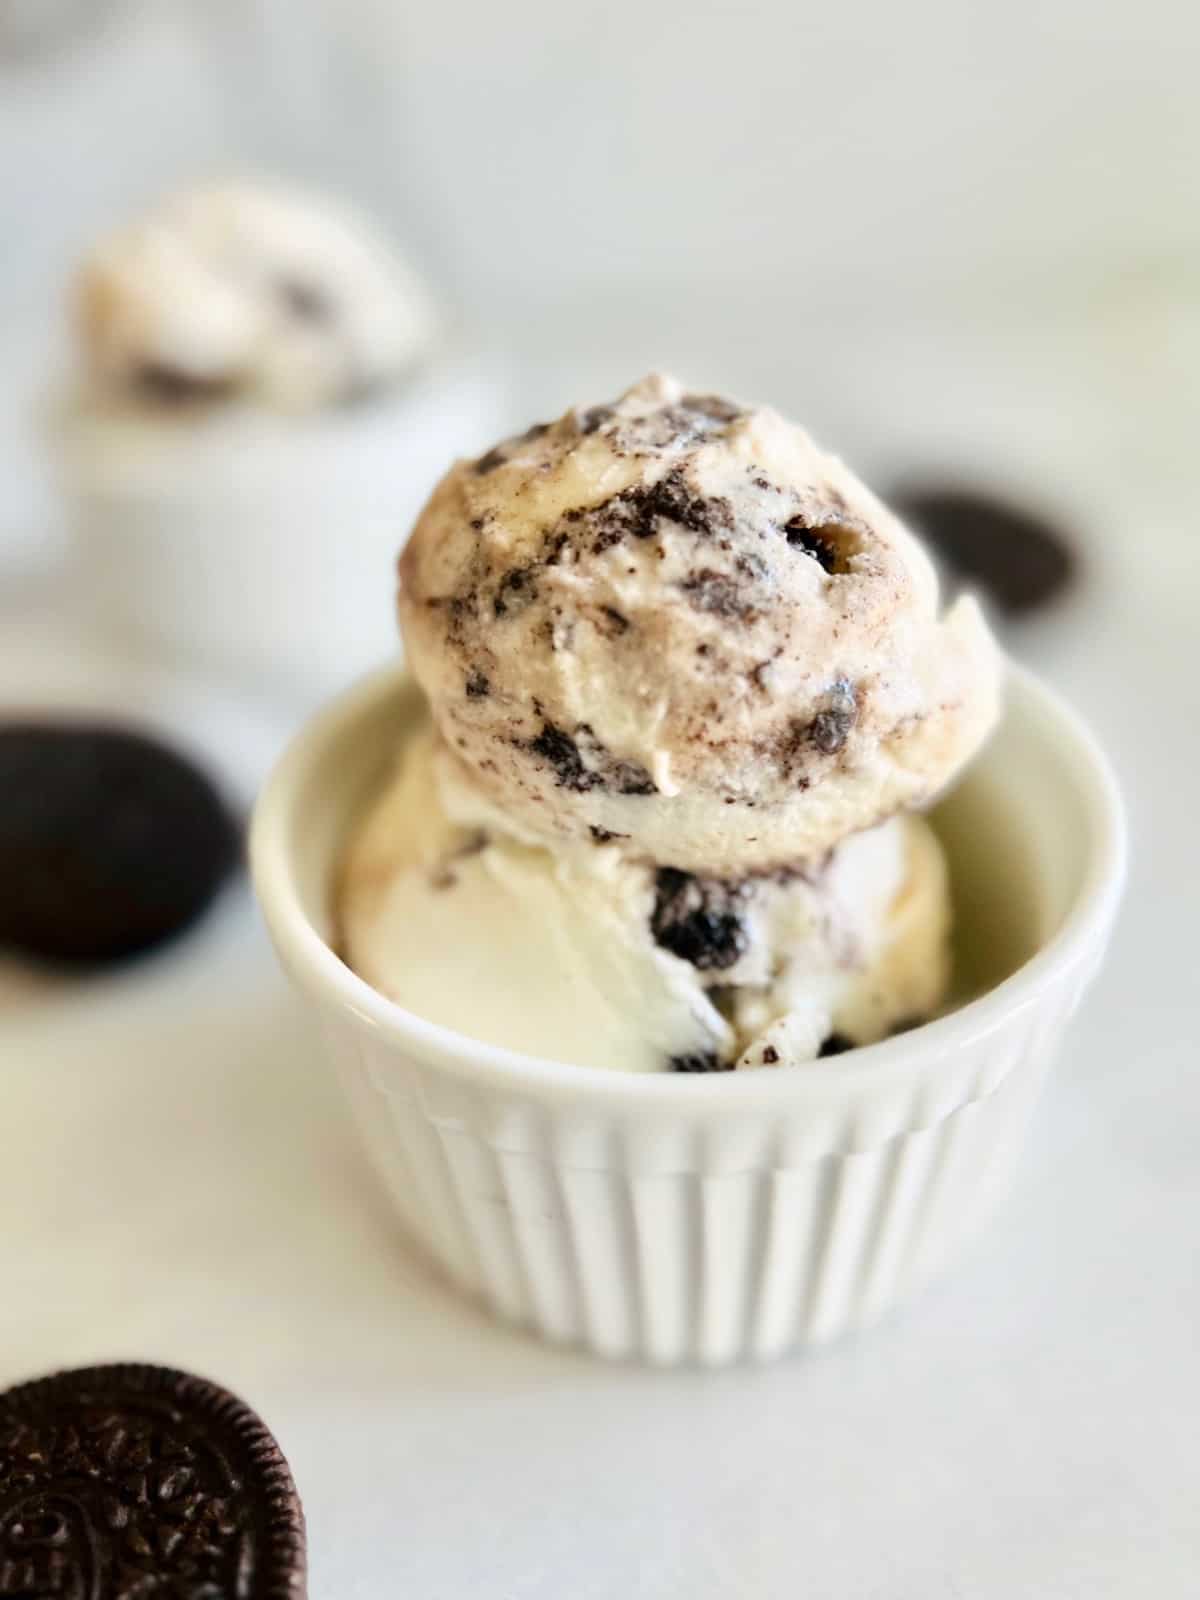 Oreo Cookies & Cream Ice Cream Portrait side view of ramekin with two scoops and Oreos on the side.